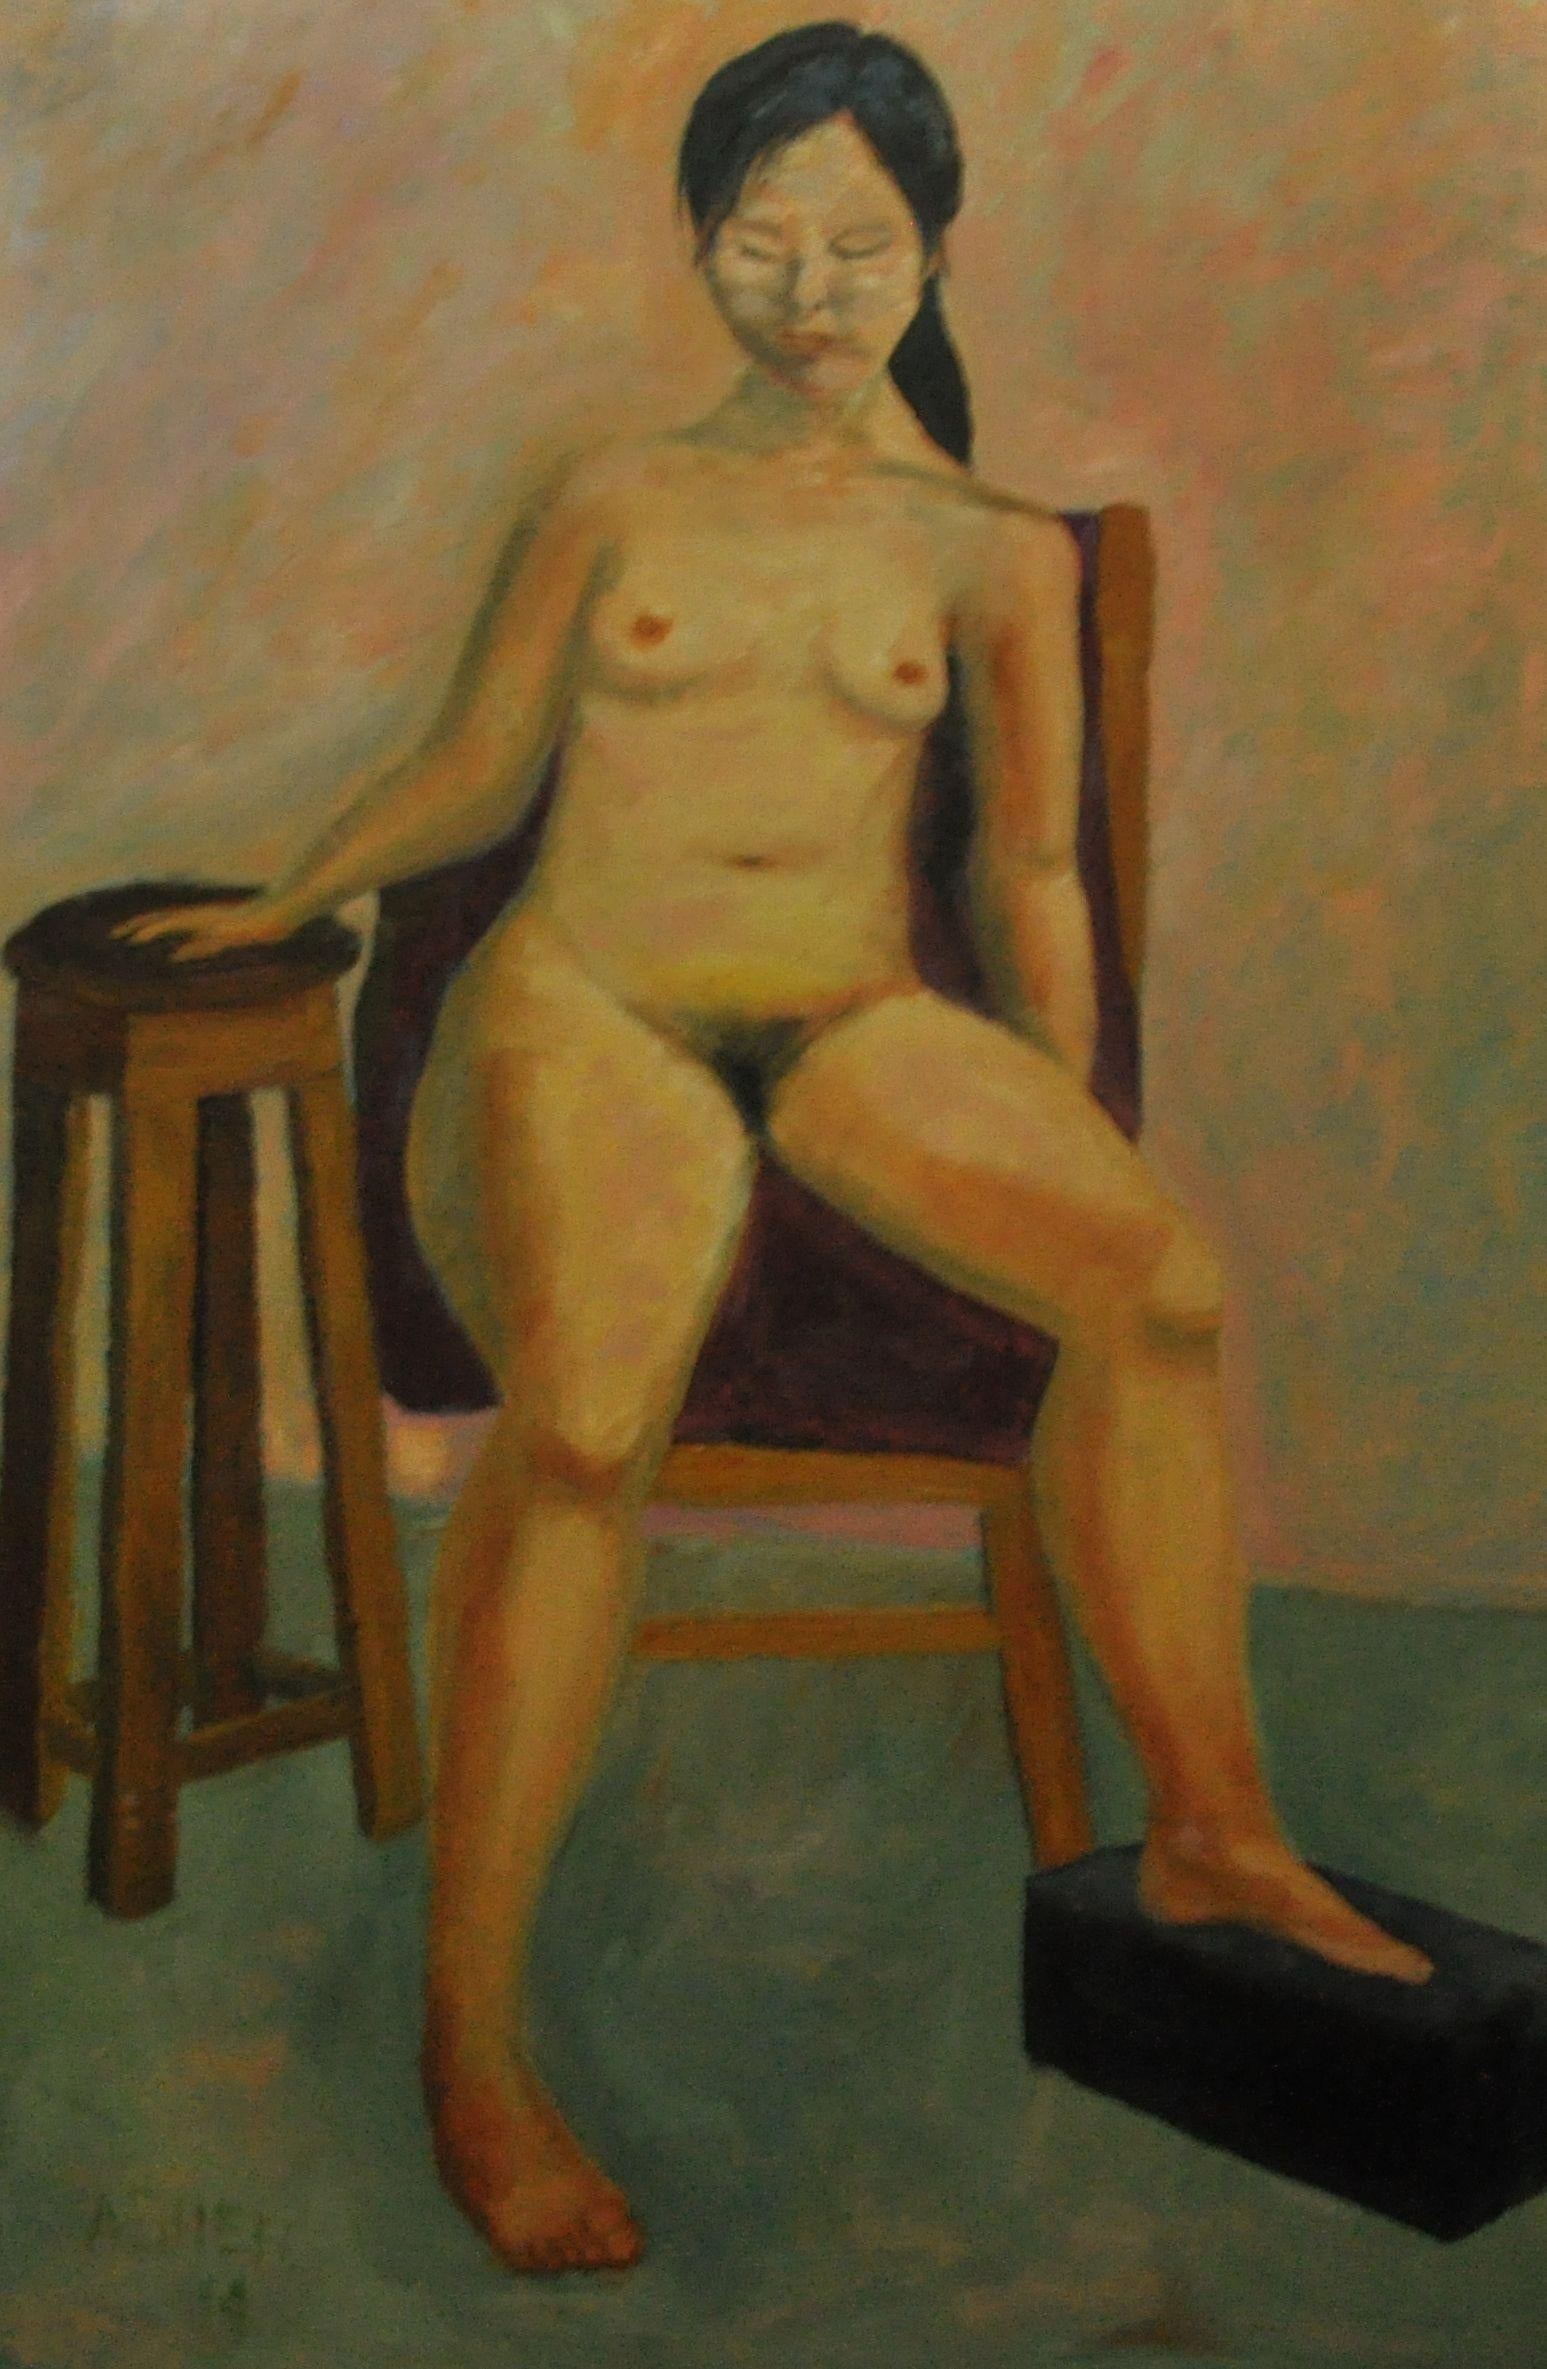 Asher Topel Nude Painting - OLGA, Painting, Oil on Canvas